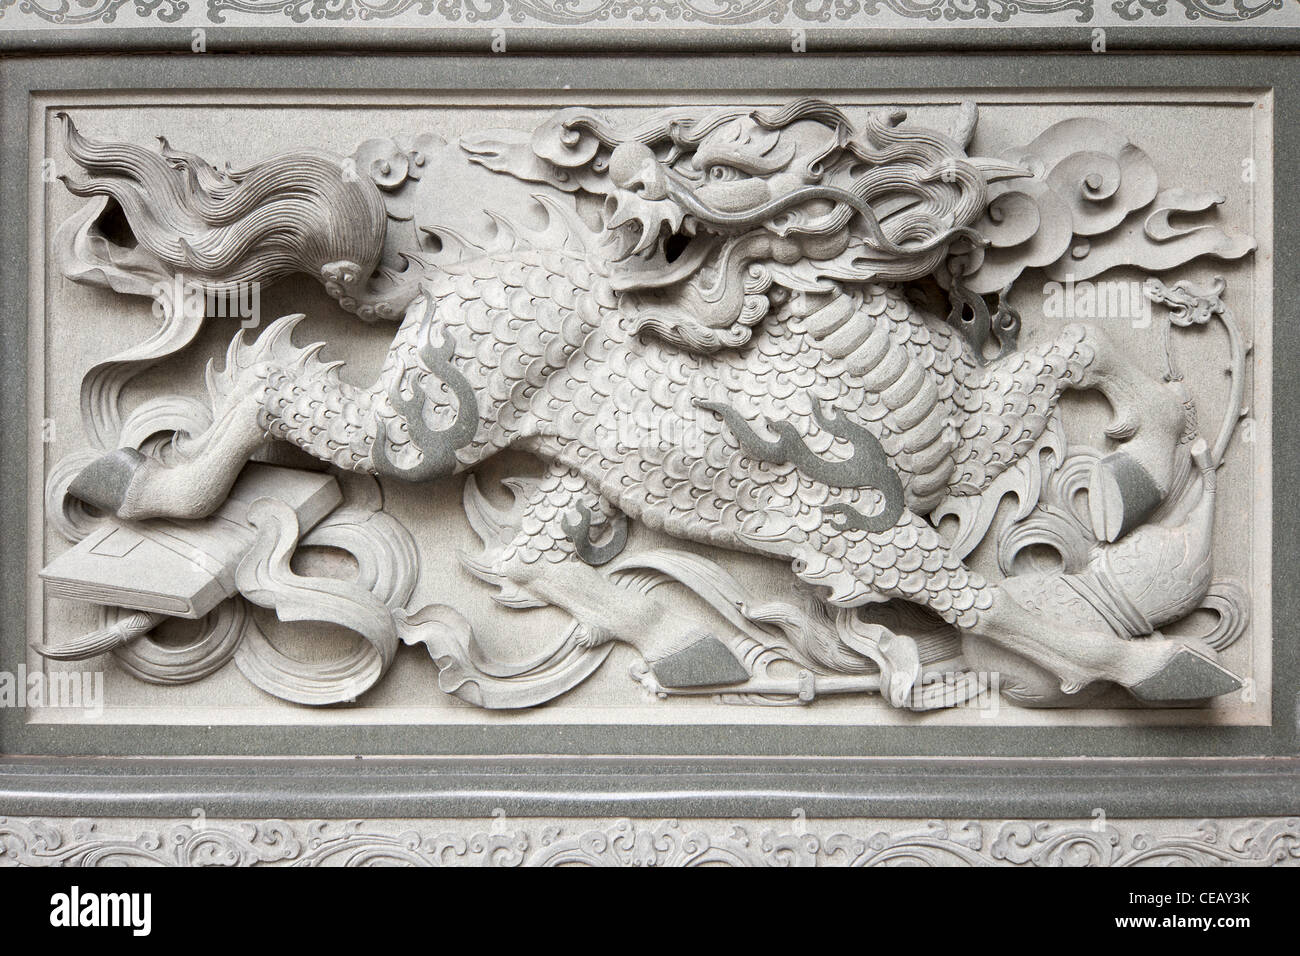 Stone Carving of Qilin on Chinese Temple Wall in Chinatown Stock Photo -  Alamy